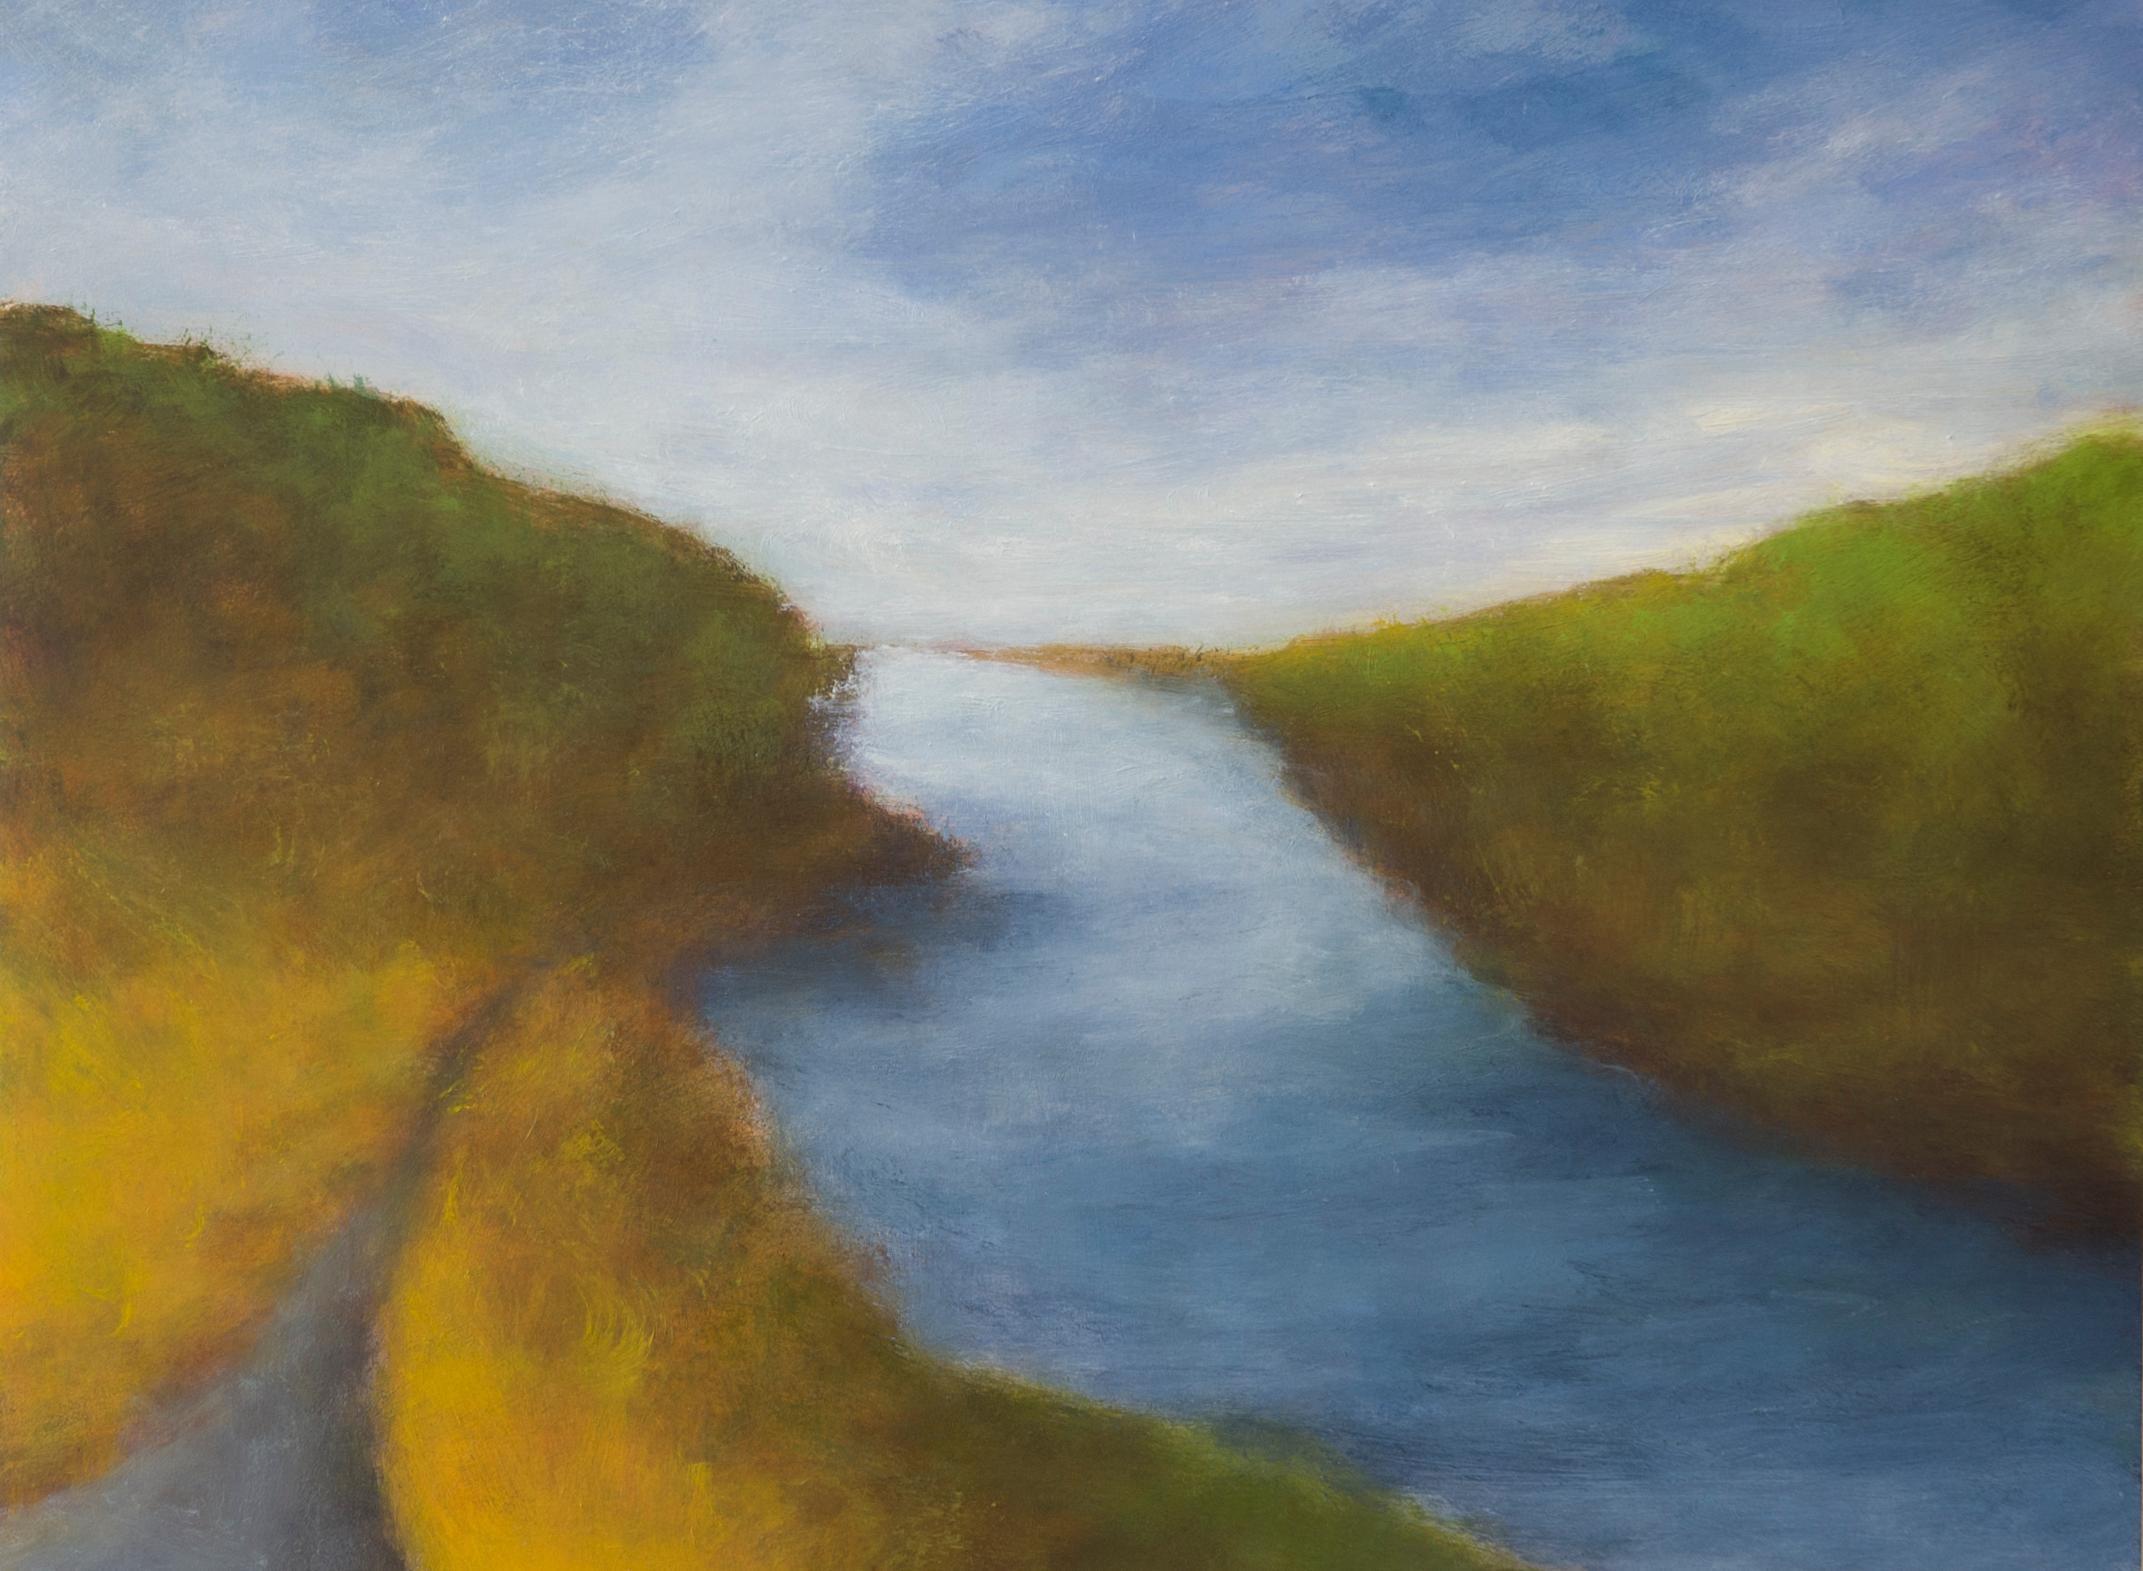 Upstream in Iceland - Brown Landscape Painting by Victoria Veedell